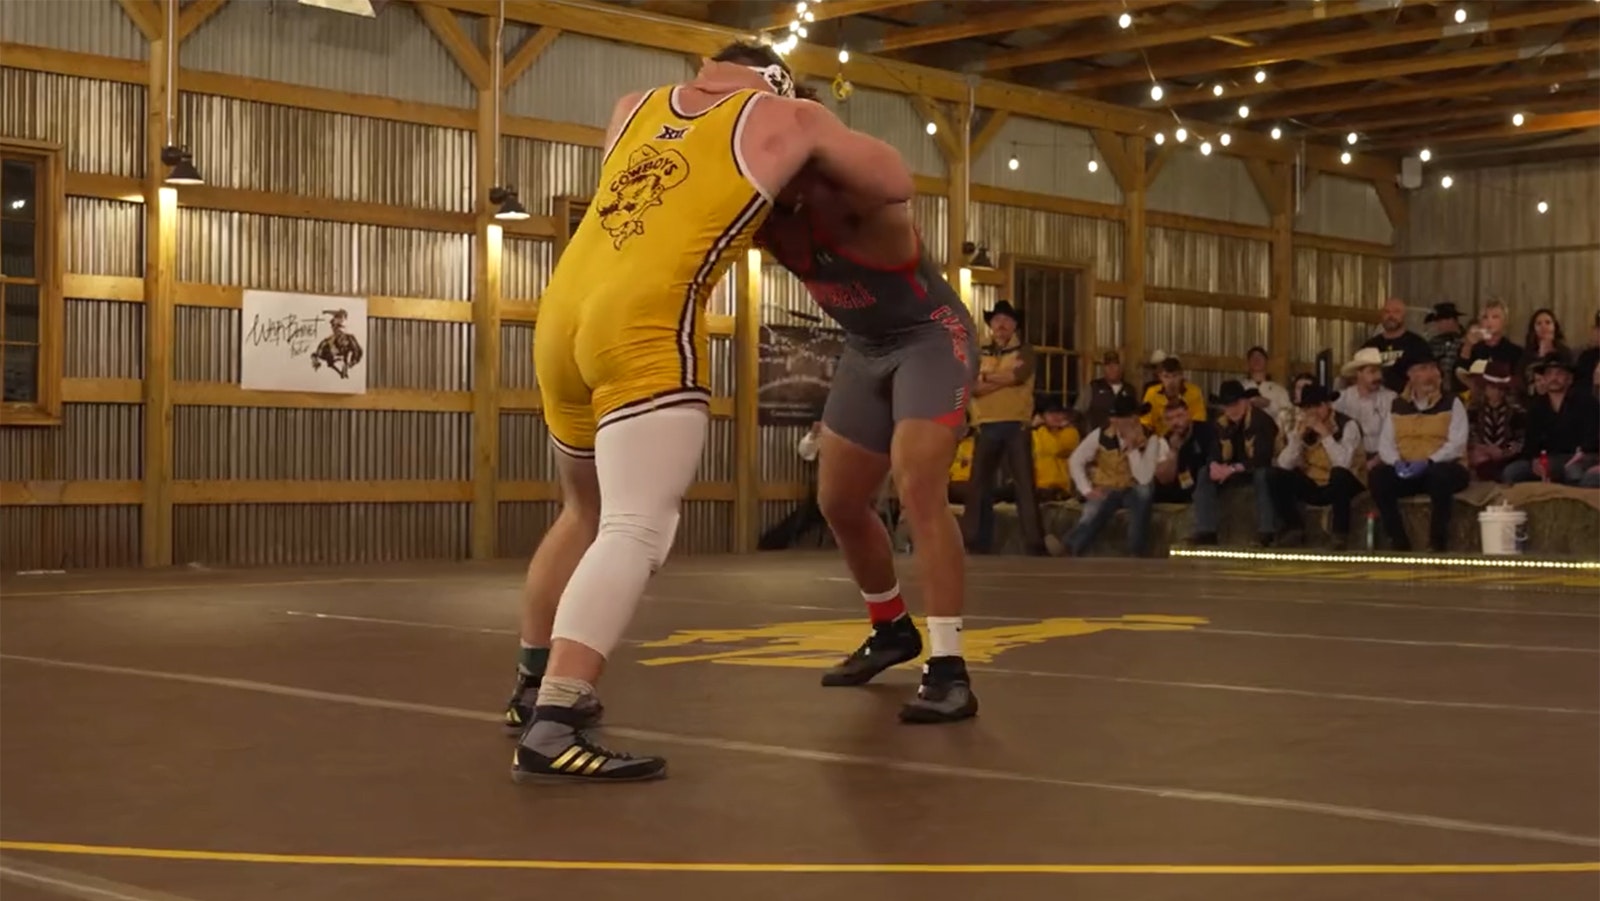 A University of Wyoming grappler ties up with an opponent from Campbell University in a barn on the Deerwood Ranch in Centennial, Wyoming, dubbed "The Battle in the Barn."